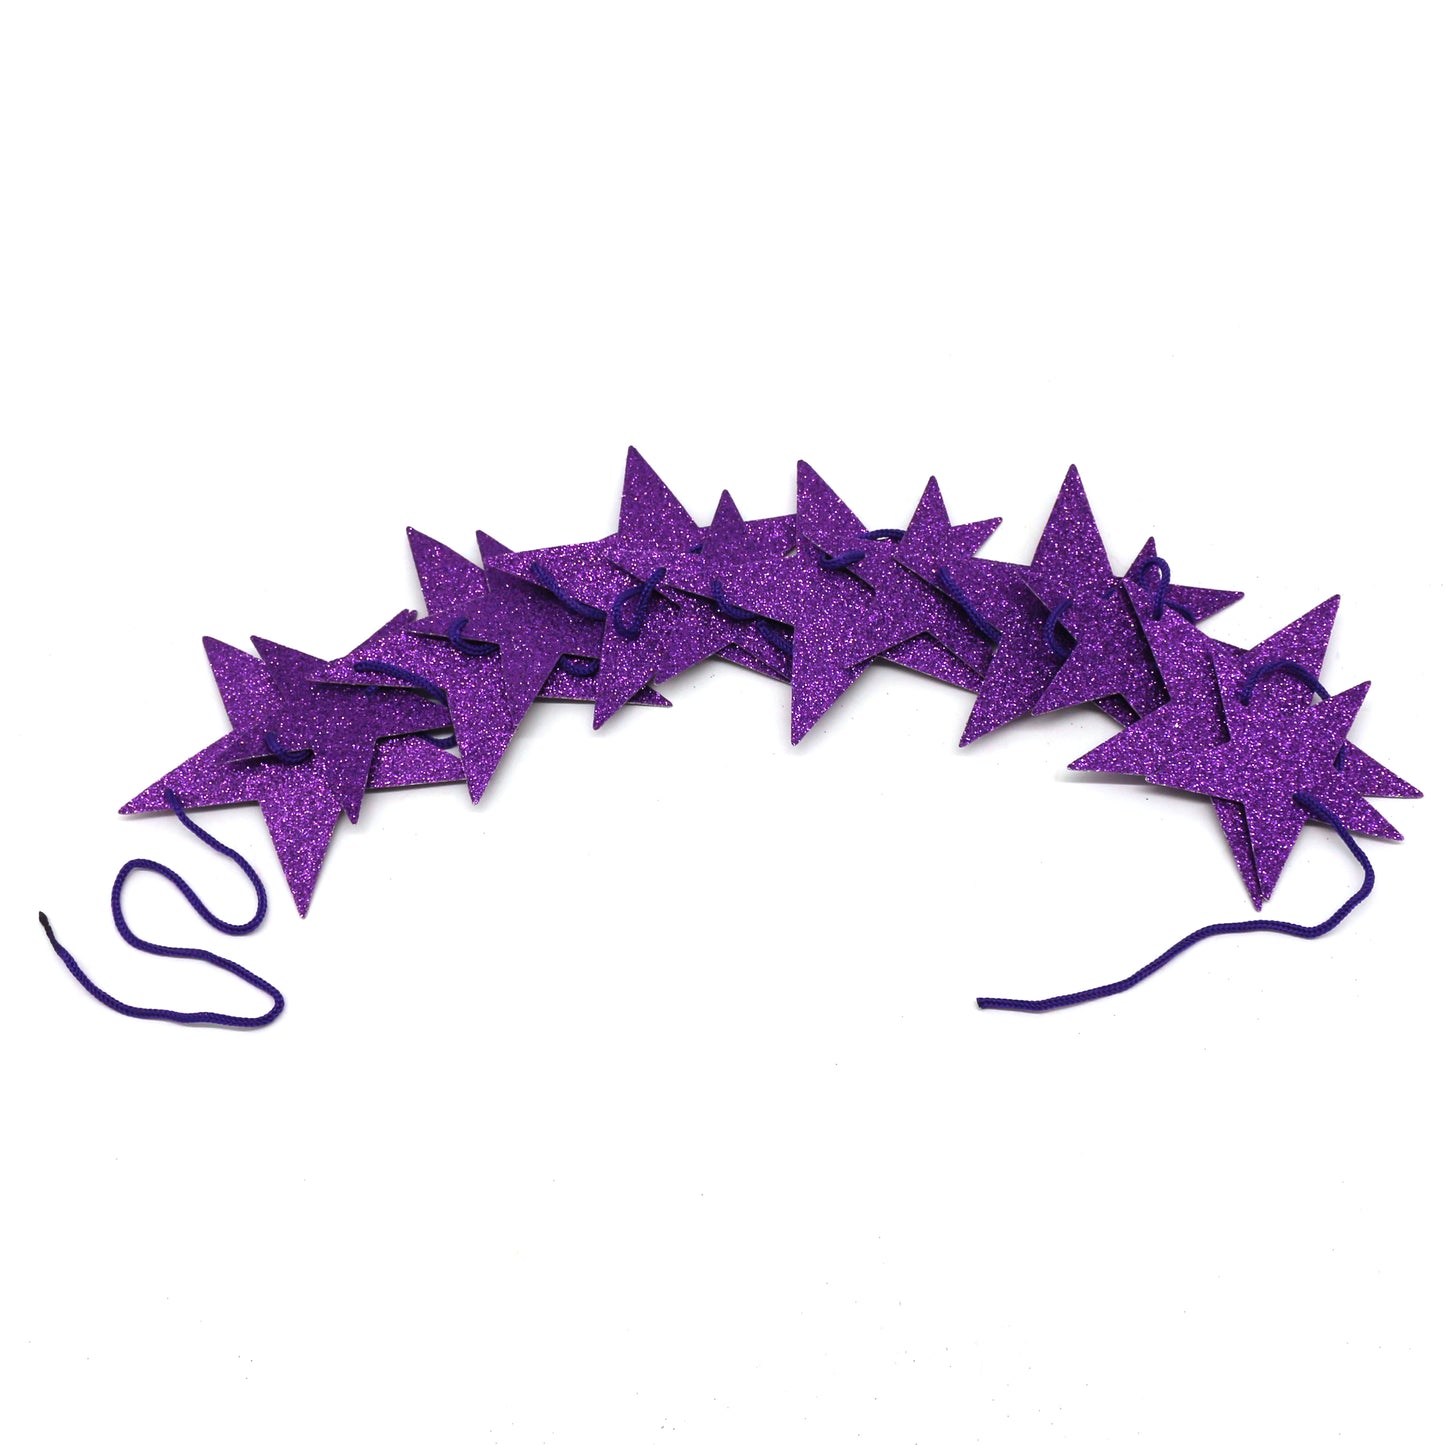 CVHOMEDECO. Twinkle Glittered Paper Star String Star Garland Unique Hanging Bunting Banner for Wedding Birthday Party Festival Home Background Decoration, 5.5 feet, Pack of 2 PCS (Purple)